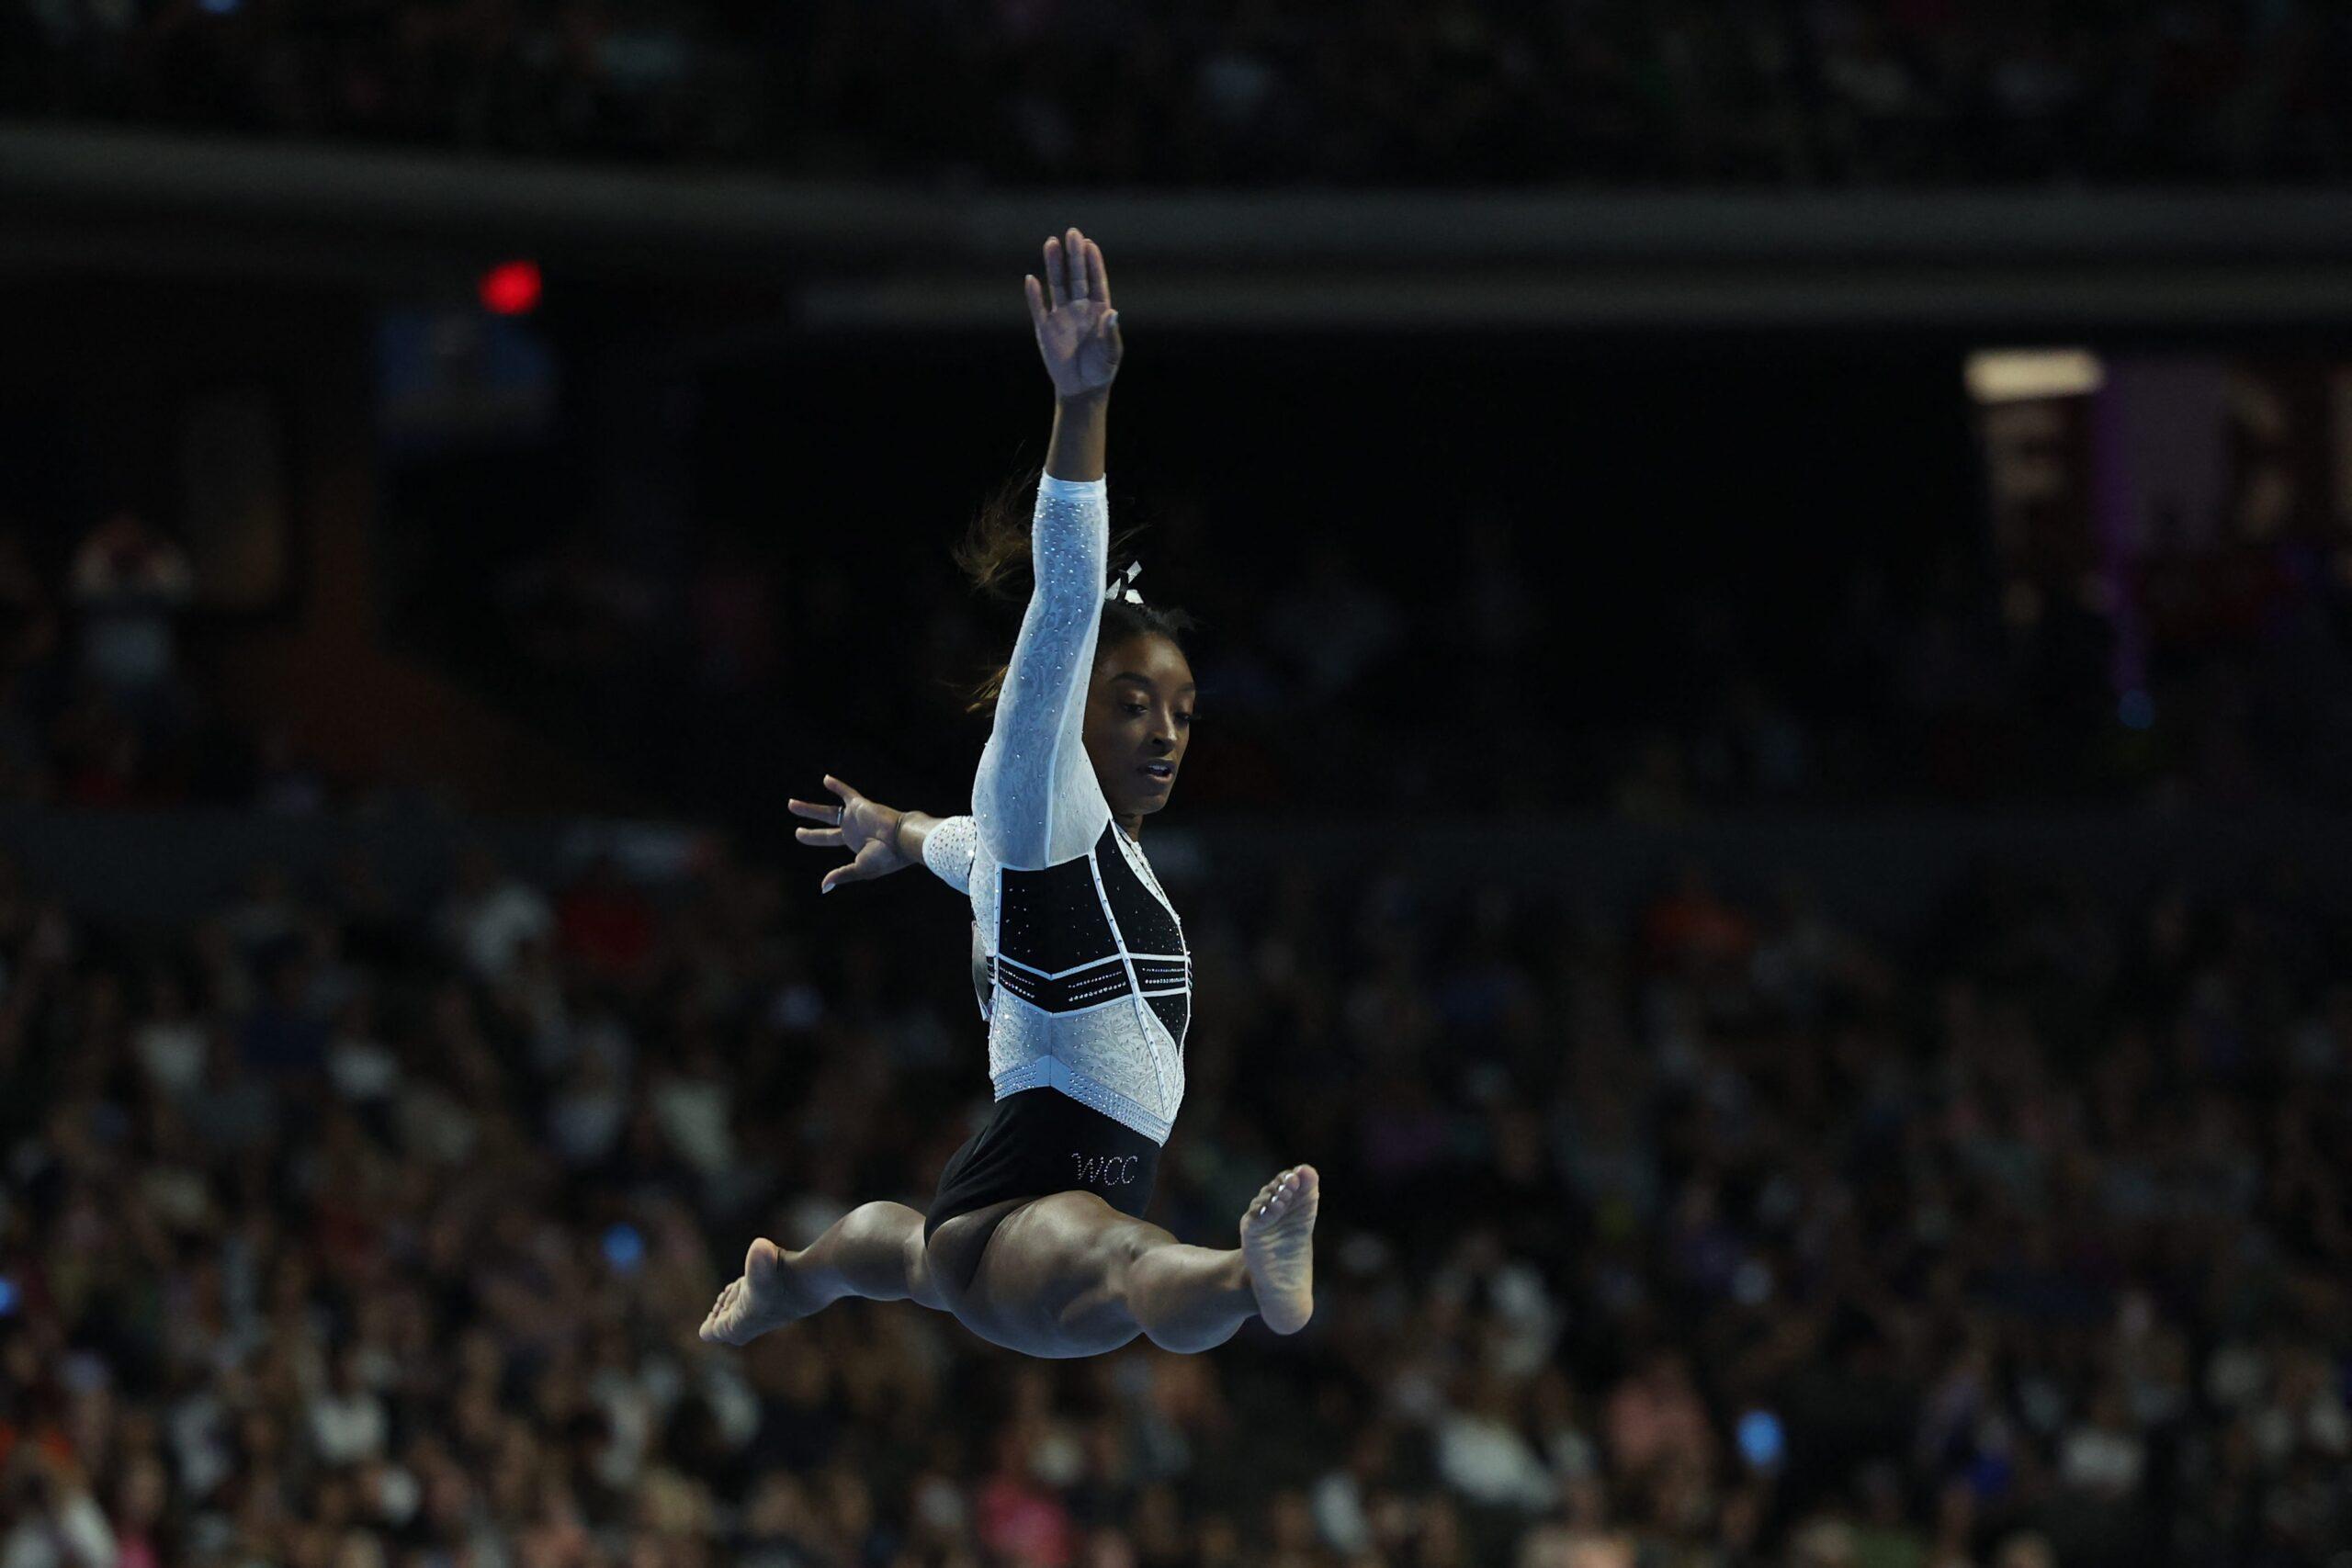 Simone Biles in her first competition since the Tokyo 2021 games.